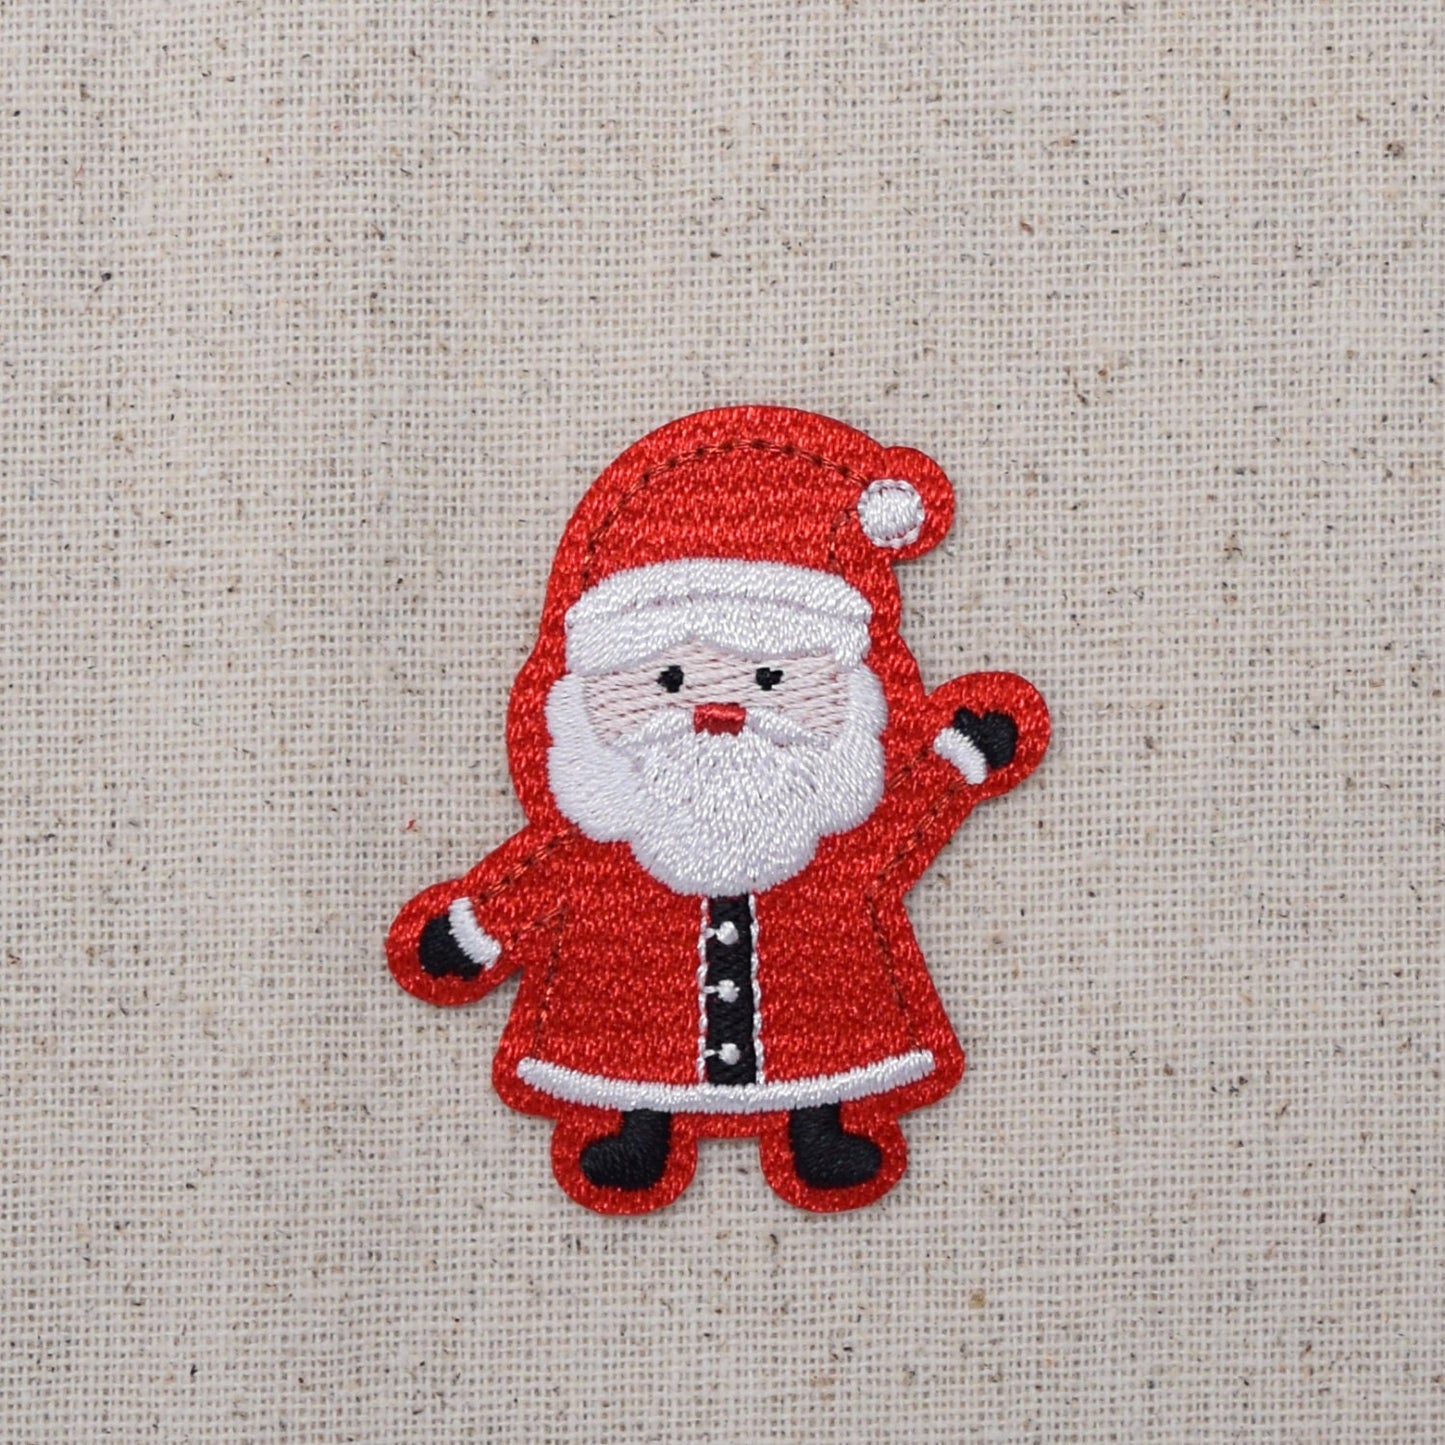 Christmas - Waving Santa Claus - Embroidered Iron on Patch